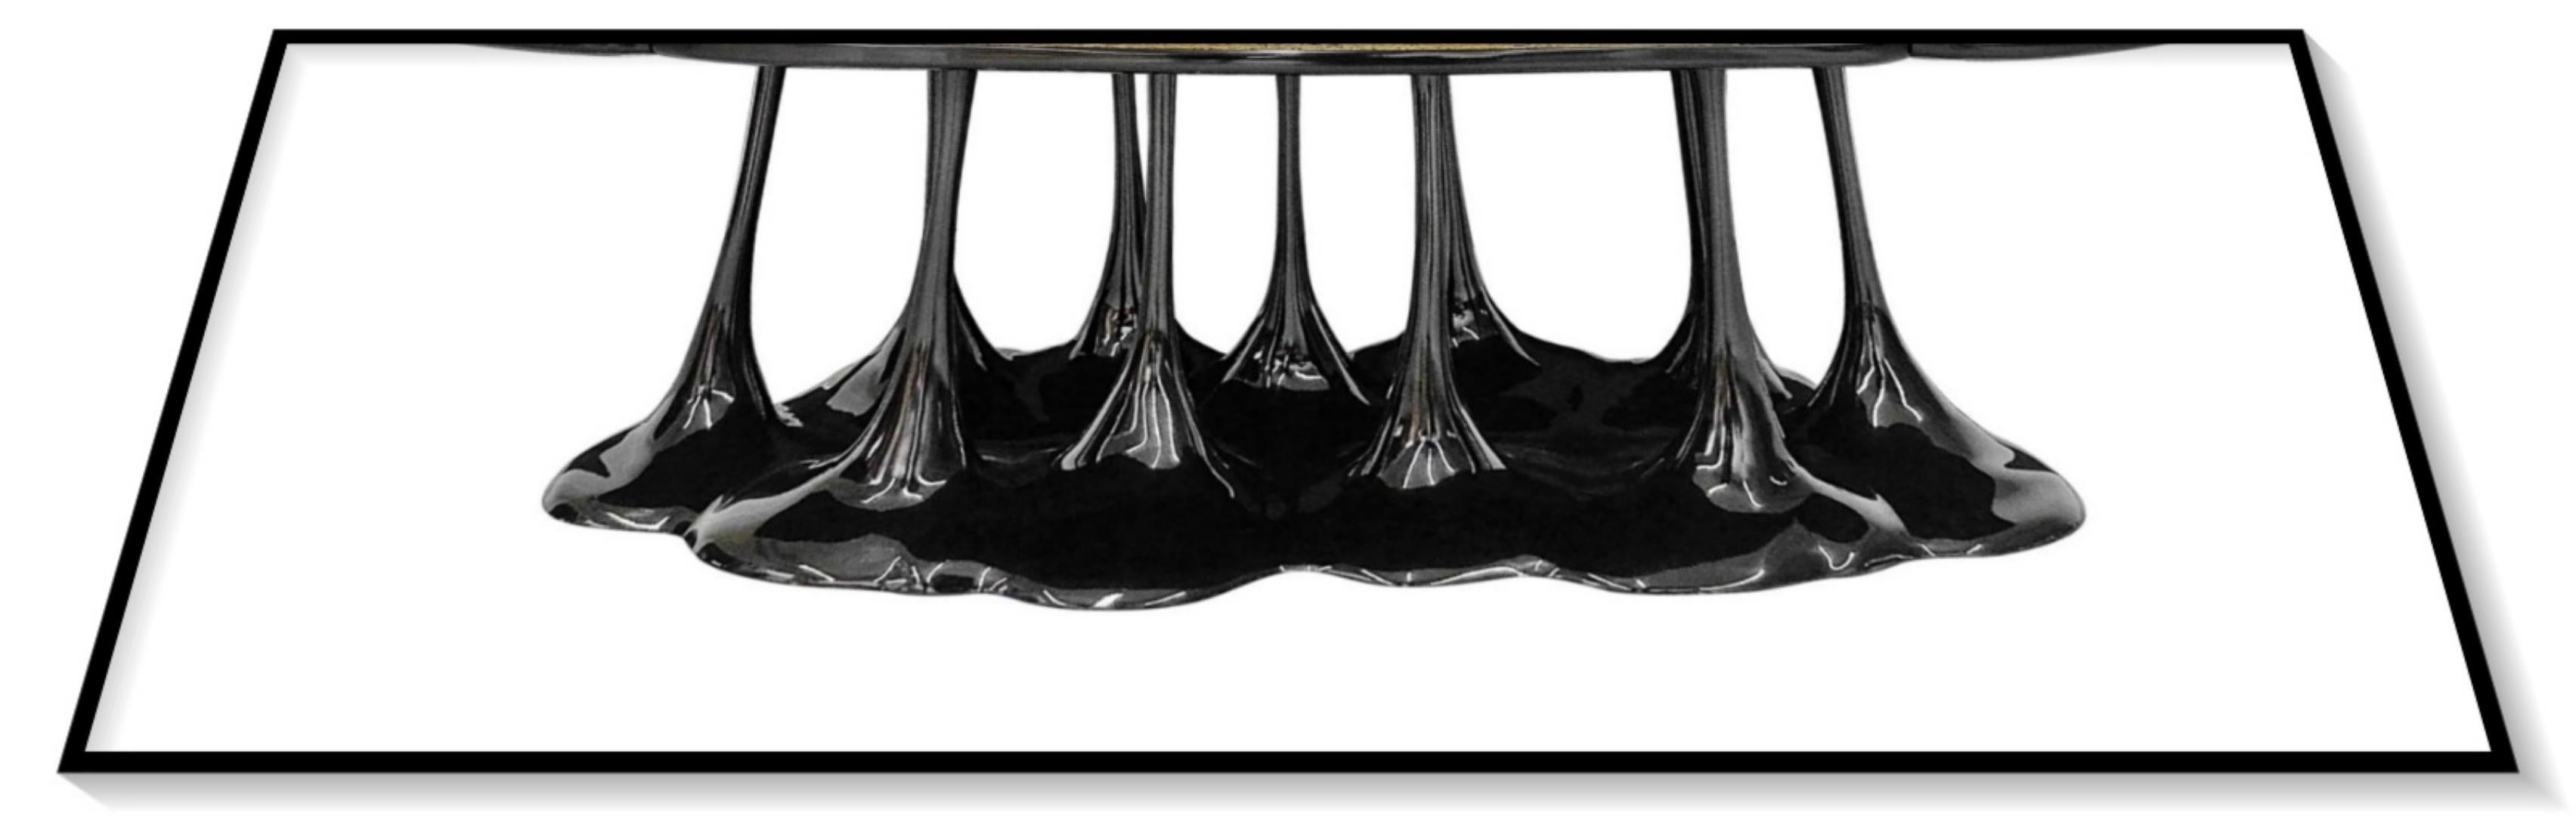 Portuguese New Design Dining Table Lacquered in Black with High Gloss Finish 8/10 Persons For Sale